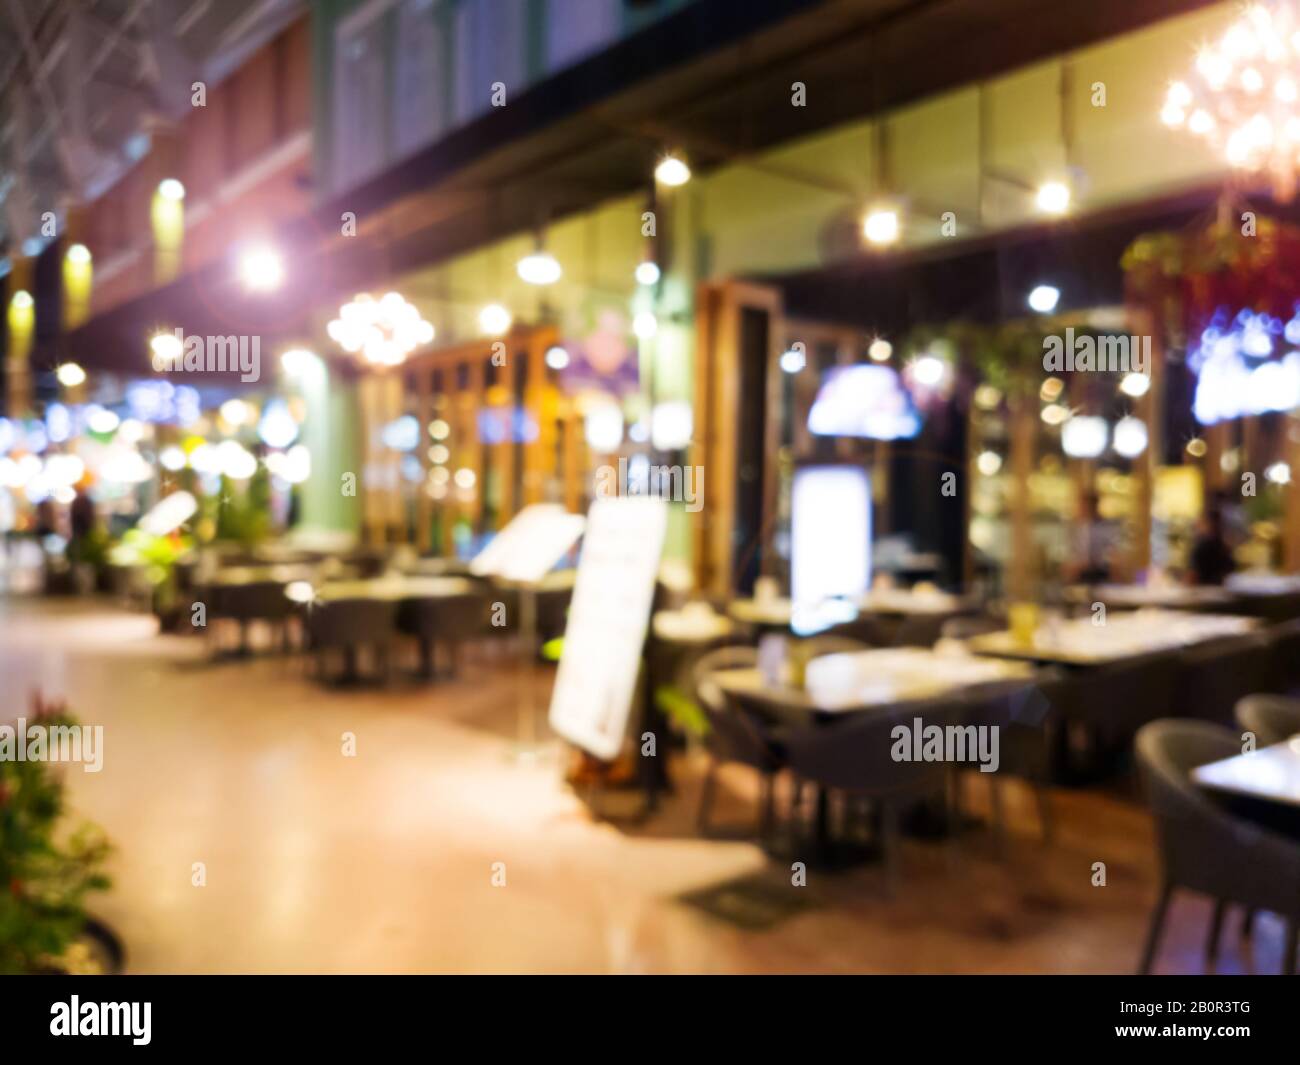 Image of abstract blur restaurant with people. Restaurant with customer for background usage Stock Photo